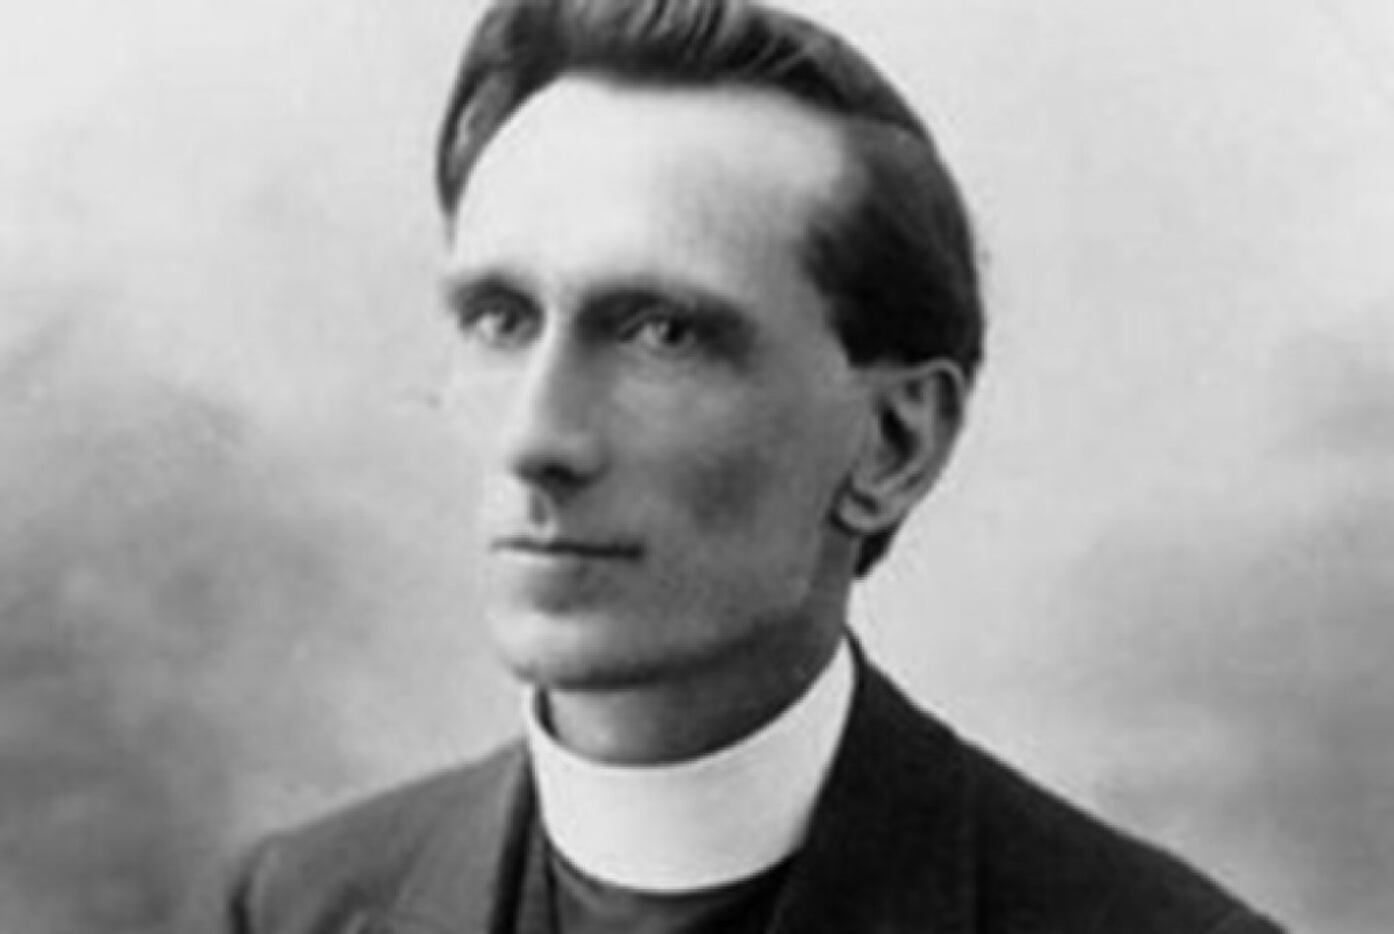 Oswald Chambers, author of My Utmost For His Highest